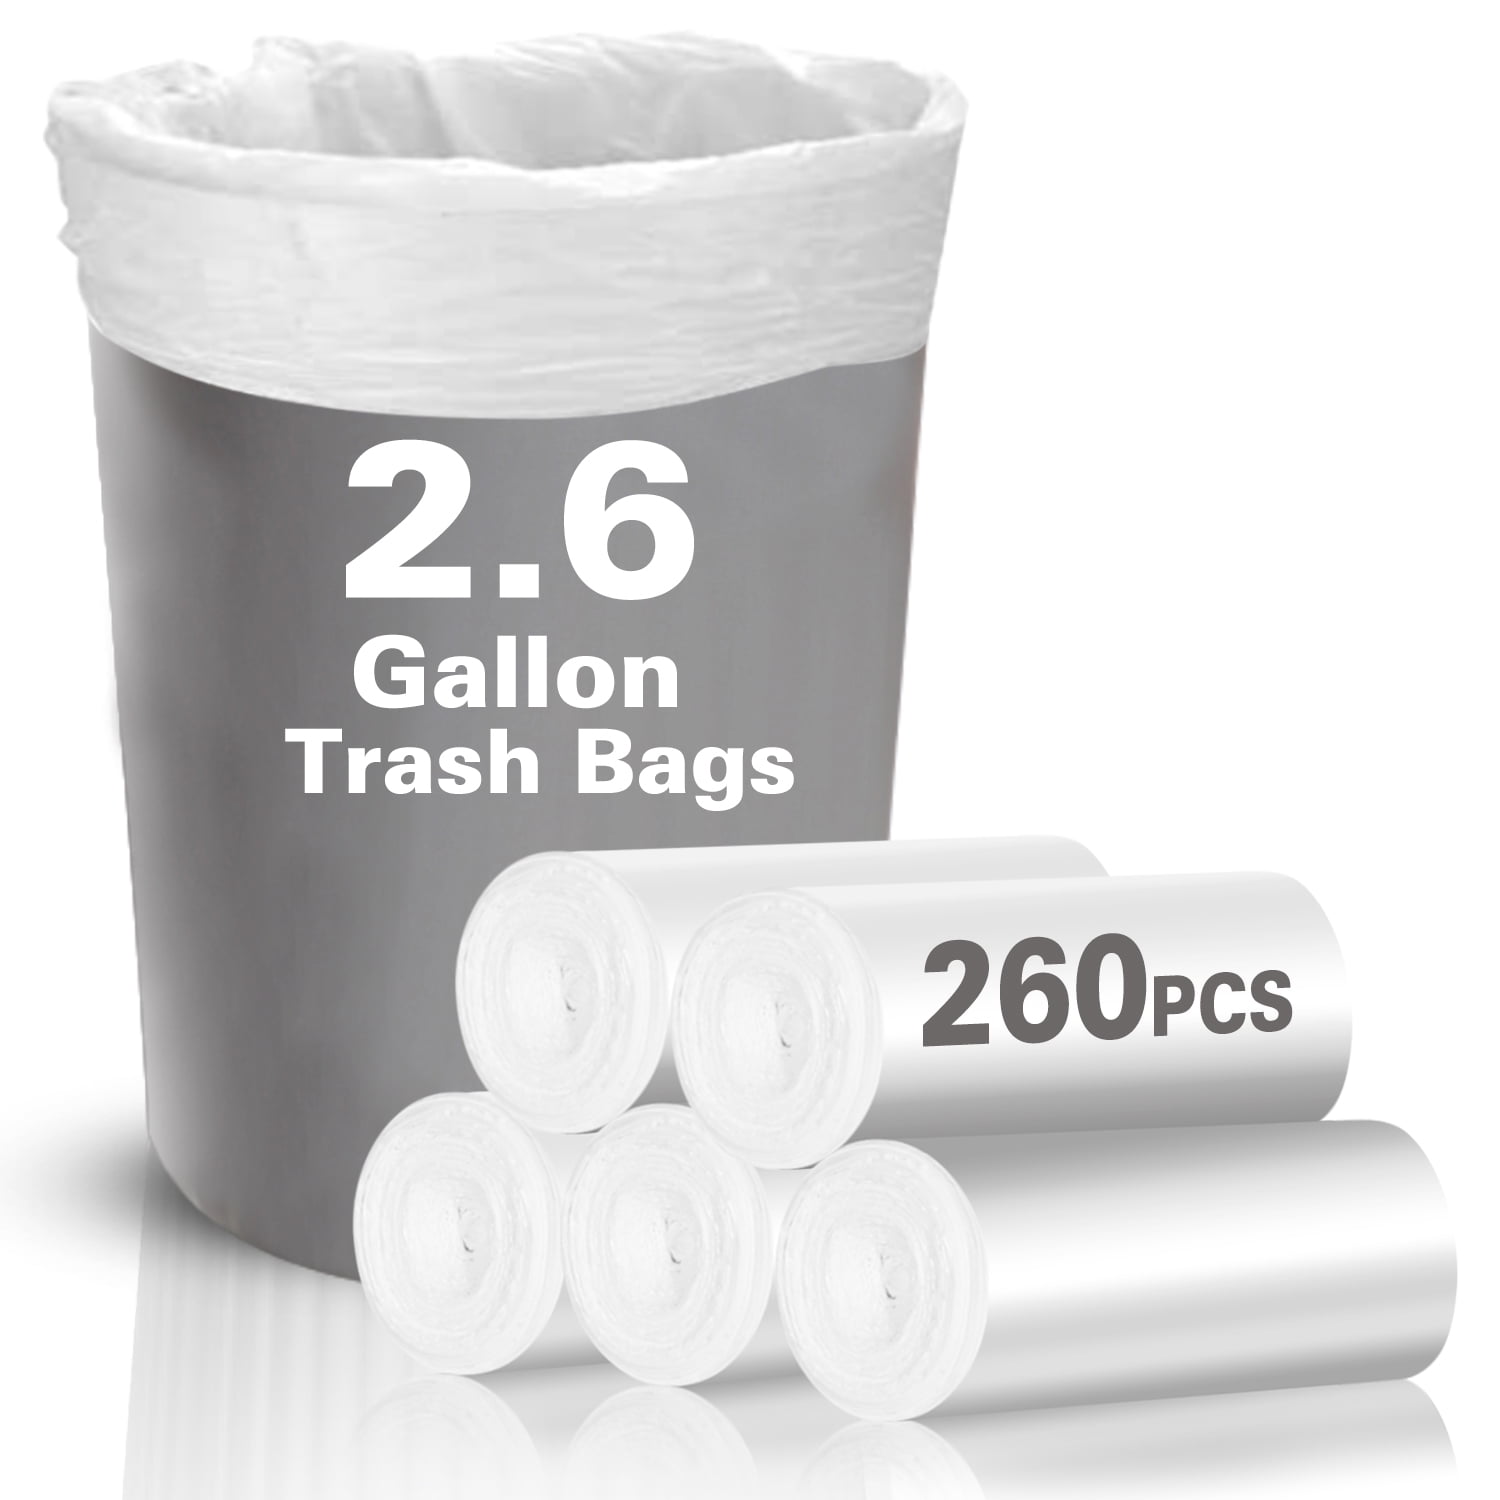 Charmount Small Trash Bags - Bathroom Trash Bags 2.6 Gallon Trash Can Liners, Unscented,180 Counts